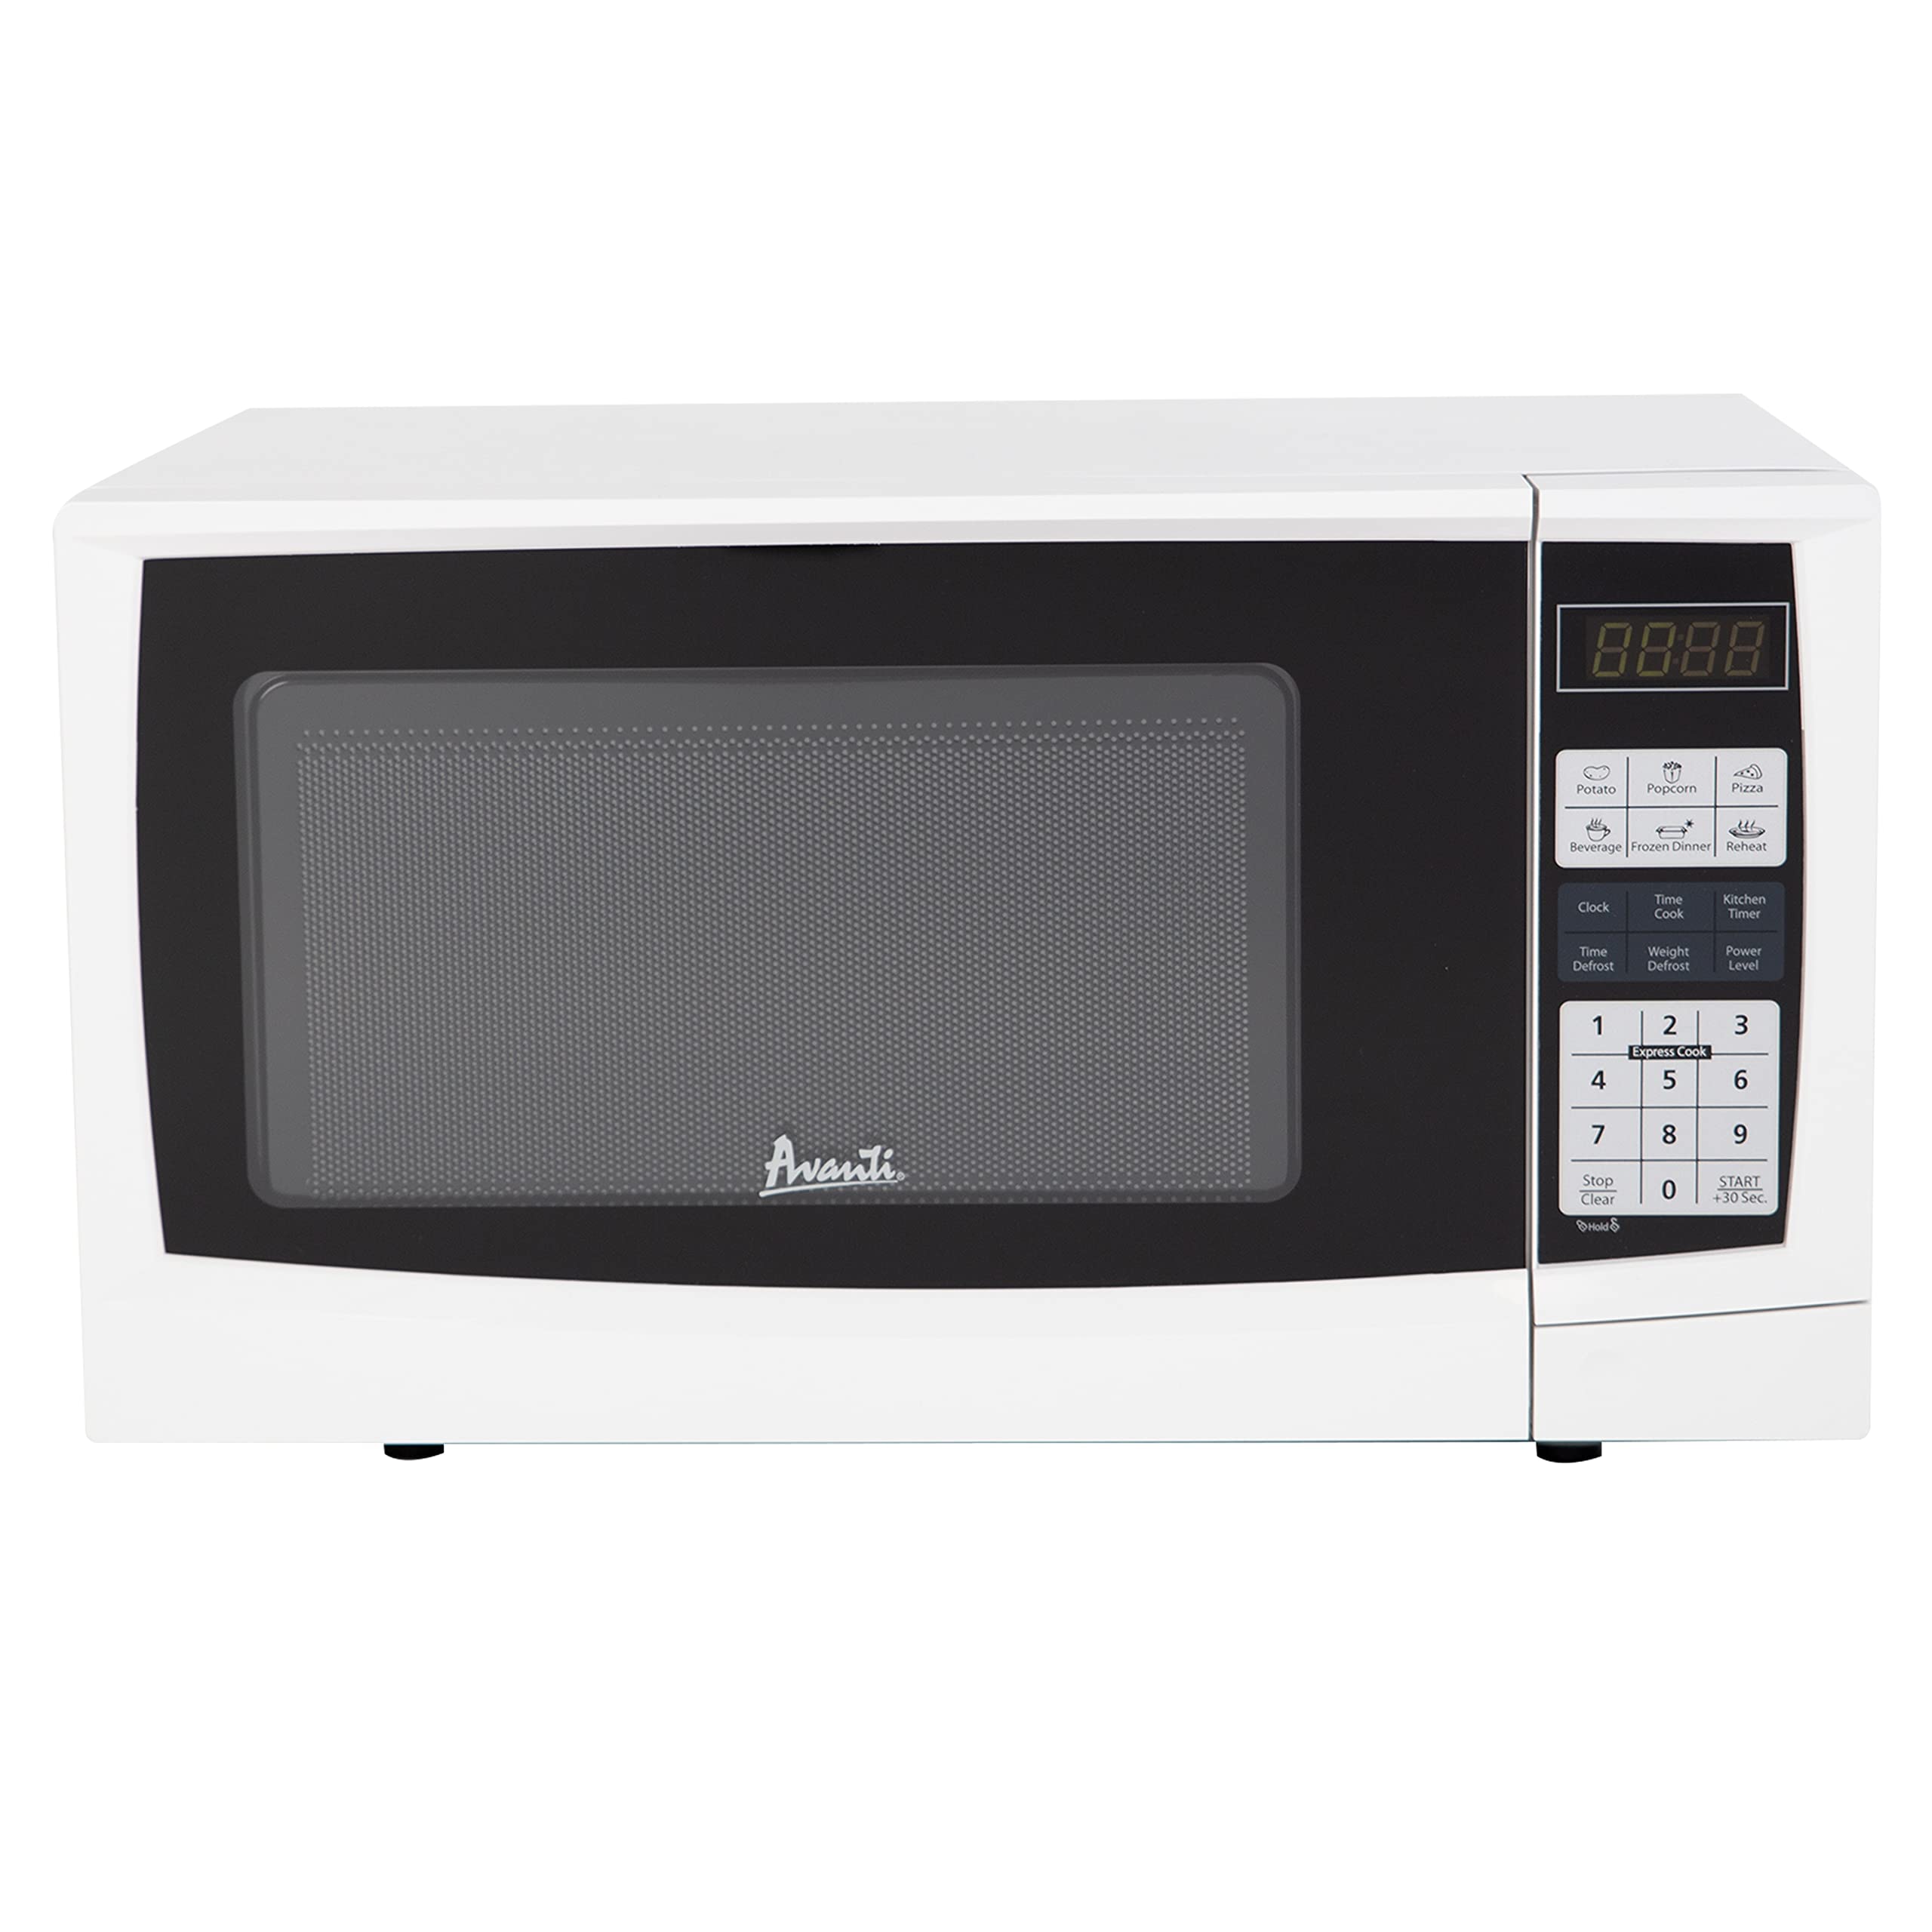 Avanti MT9K0W Microwave Oven 900-Watts Compact with 6 Pre Cooking Settings, Speed Defrost, Electronic Control Panel and Glass Tu